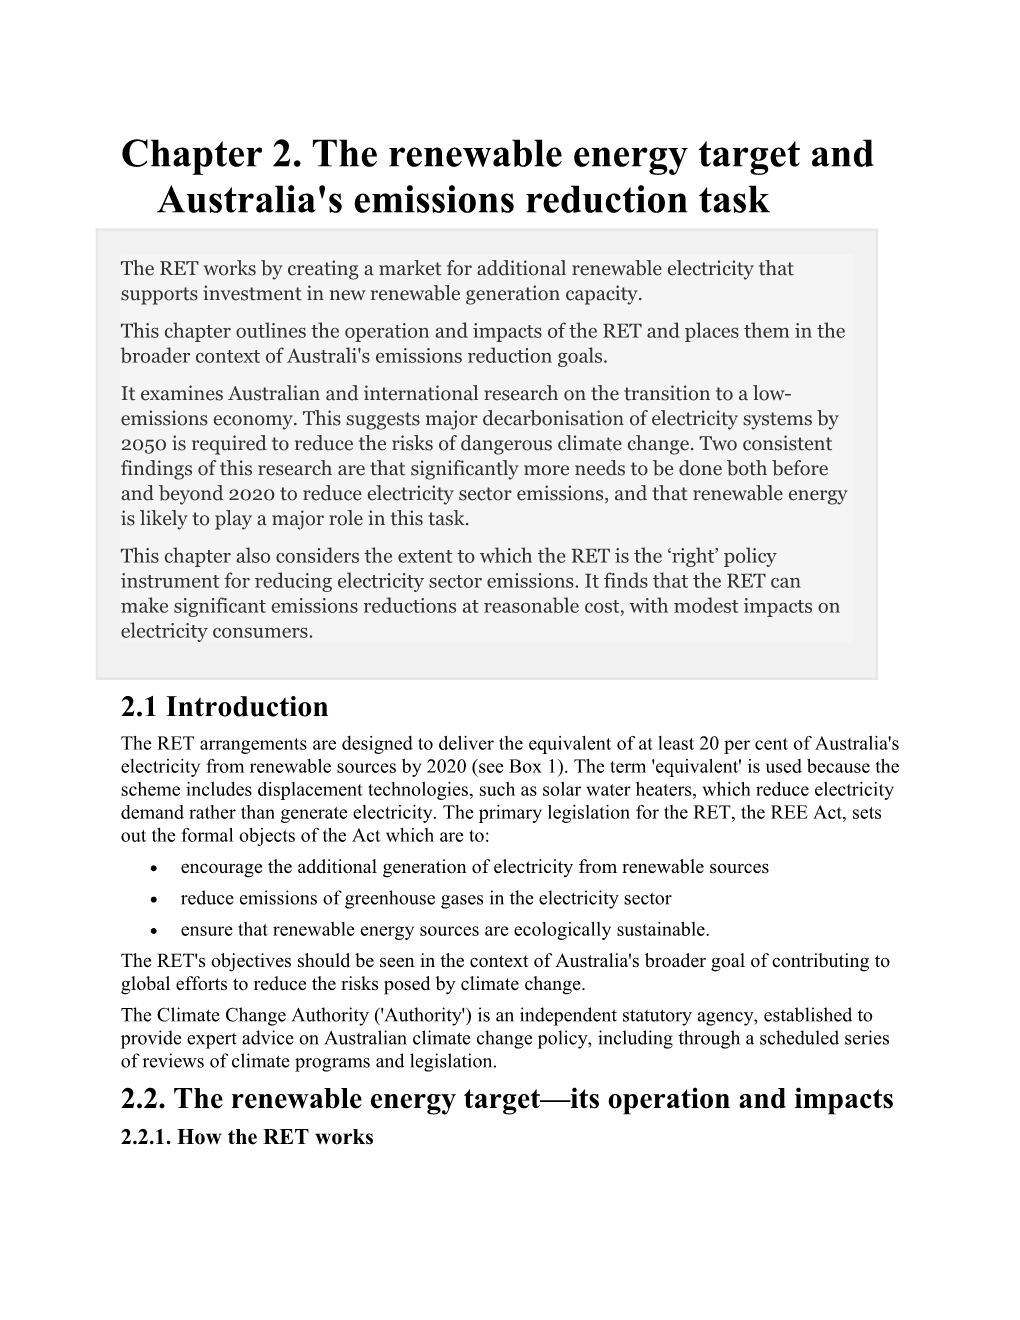 Chapter 2. the Renewable Energy Target and Australia's Emissions Reduction Task